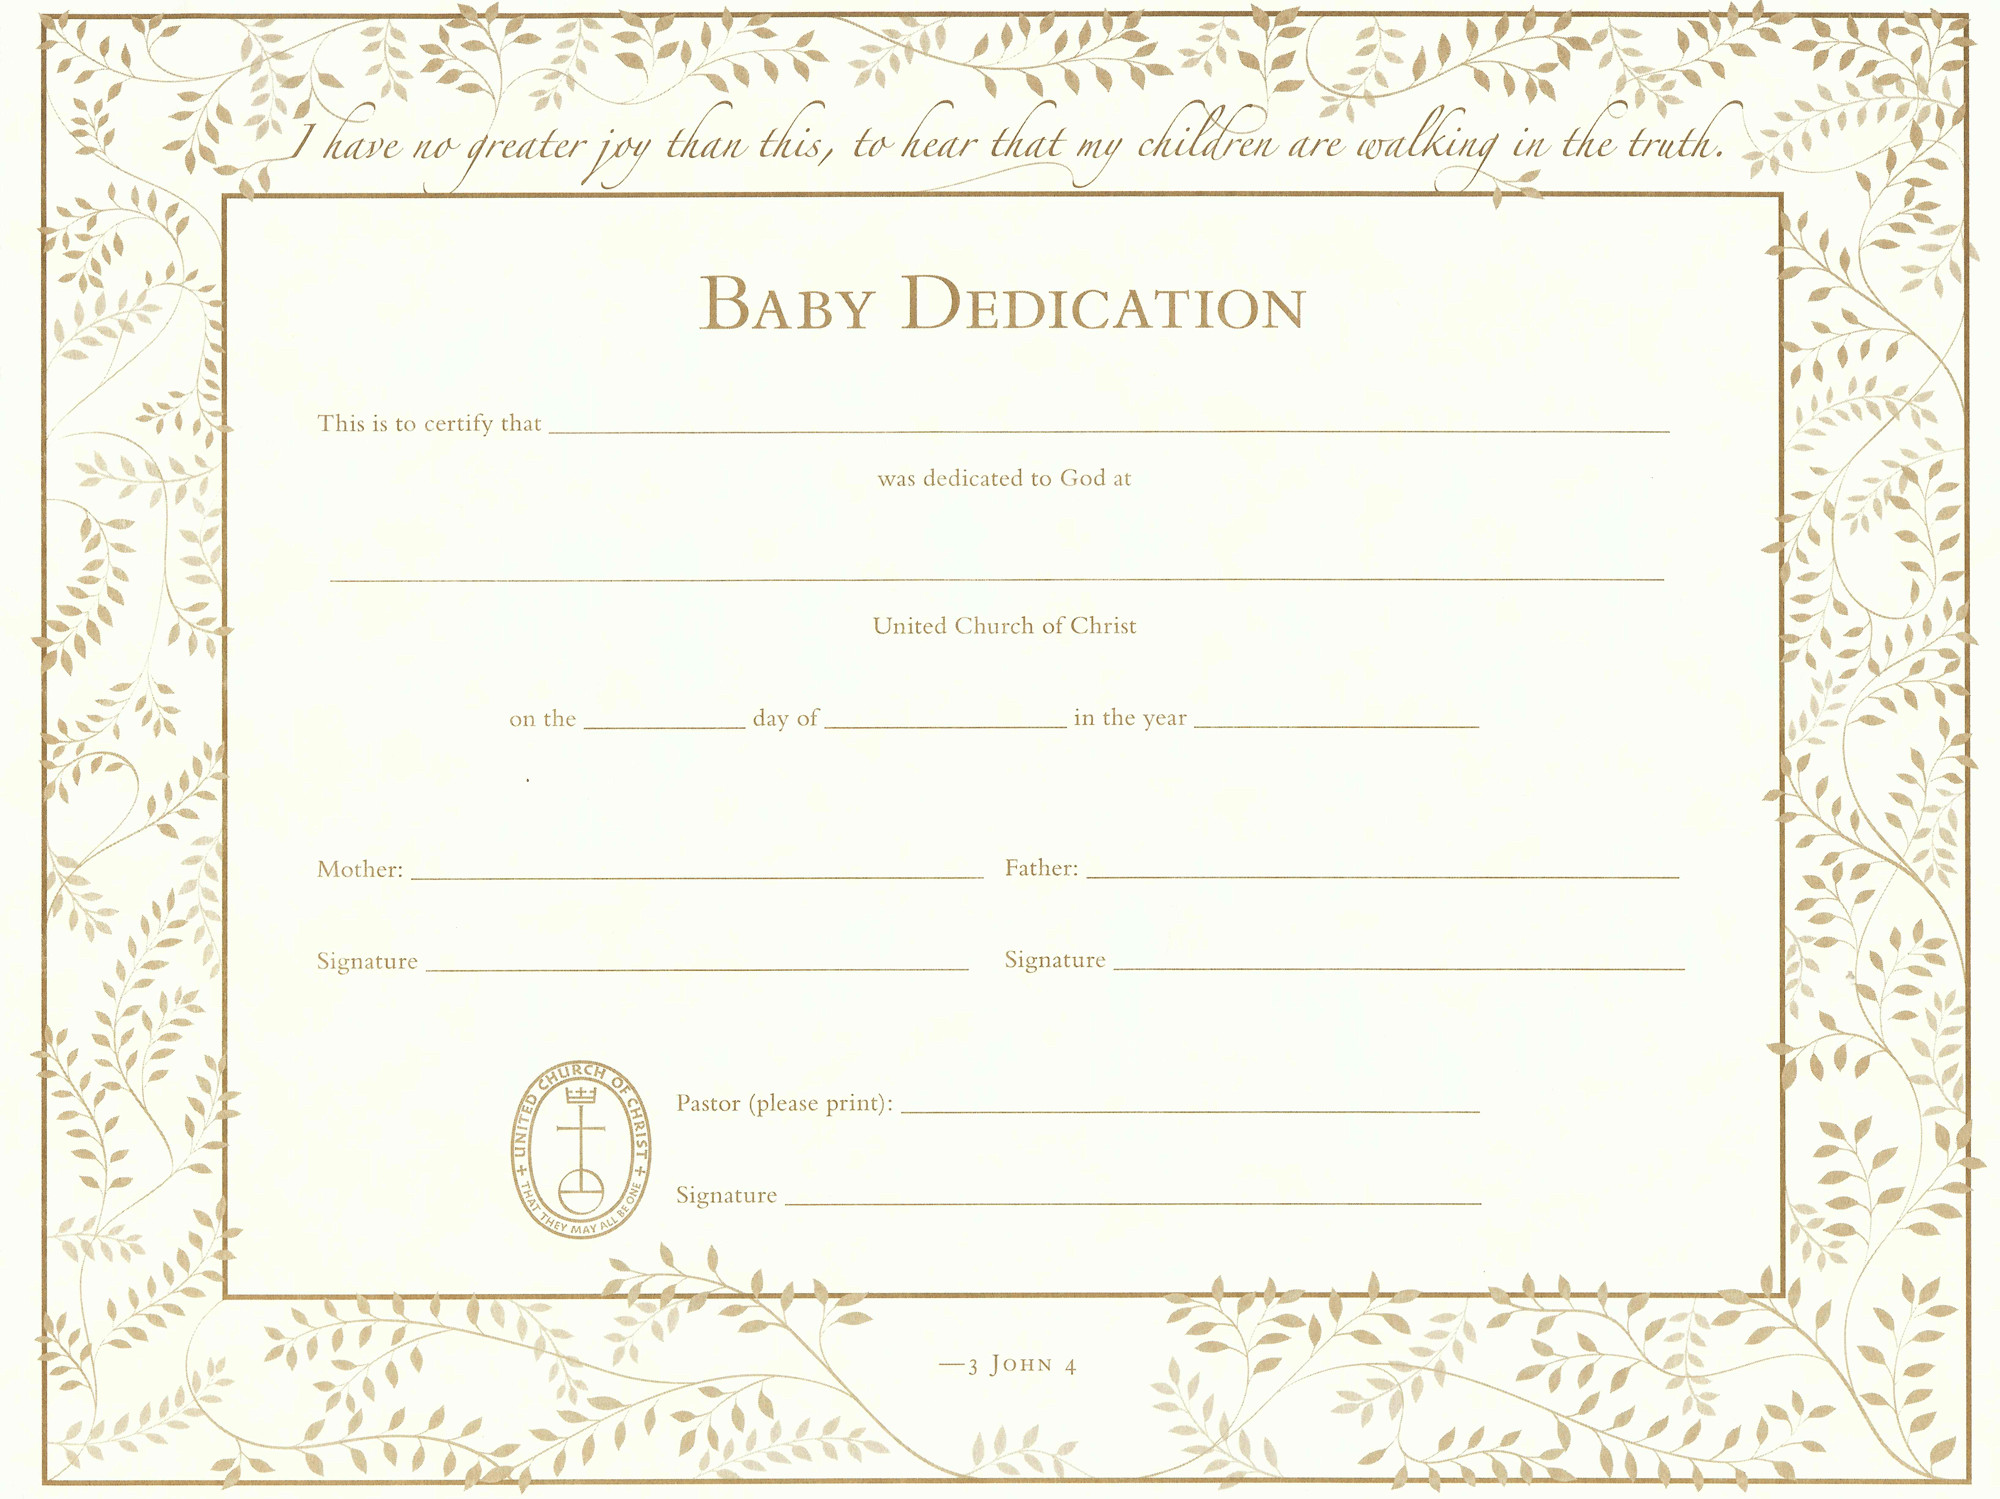 Baby Dedication Certificate Cake Ideas and Designs